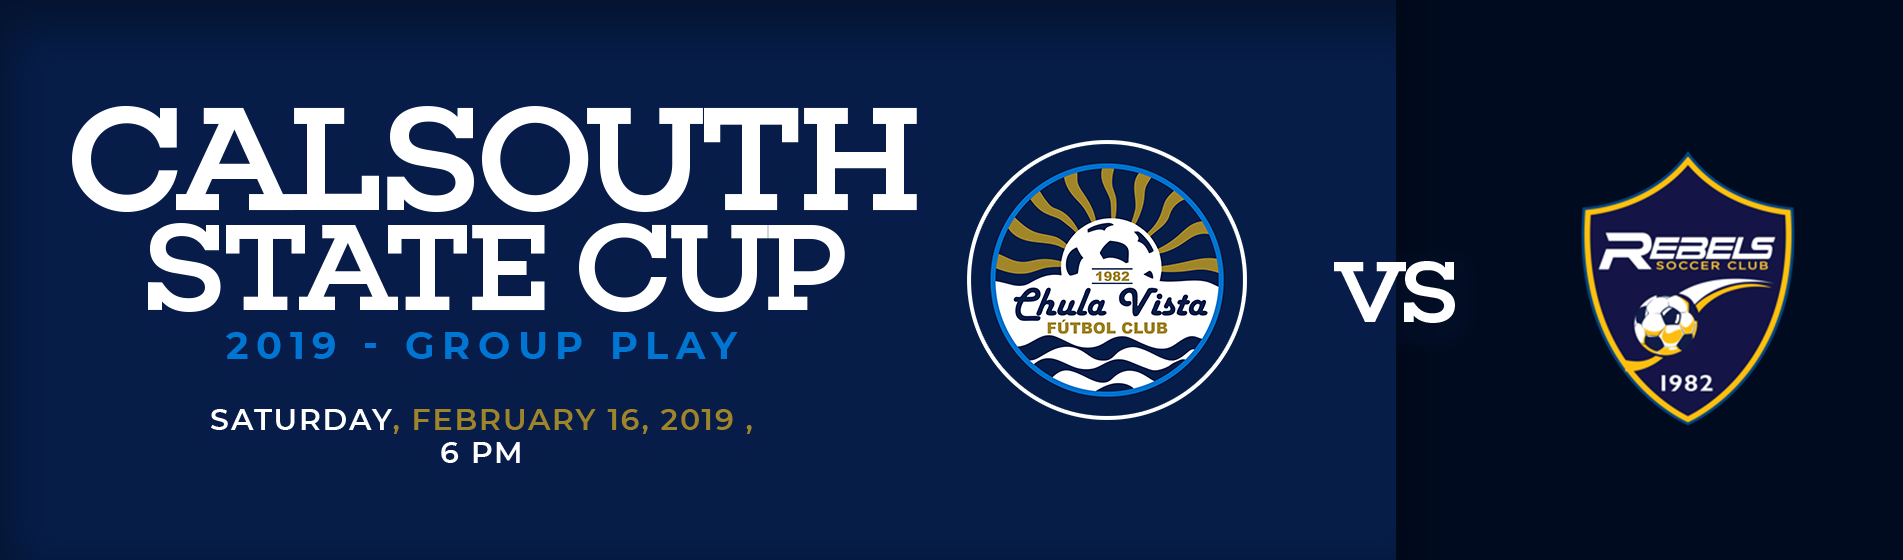 2019 Adult State Cup Begins with Local Derby